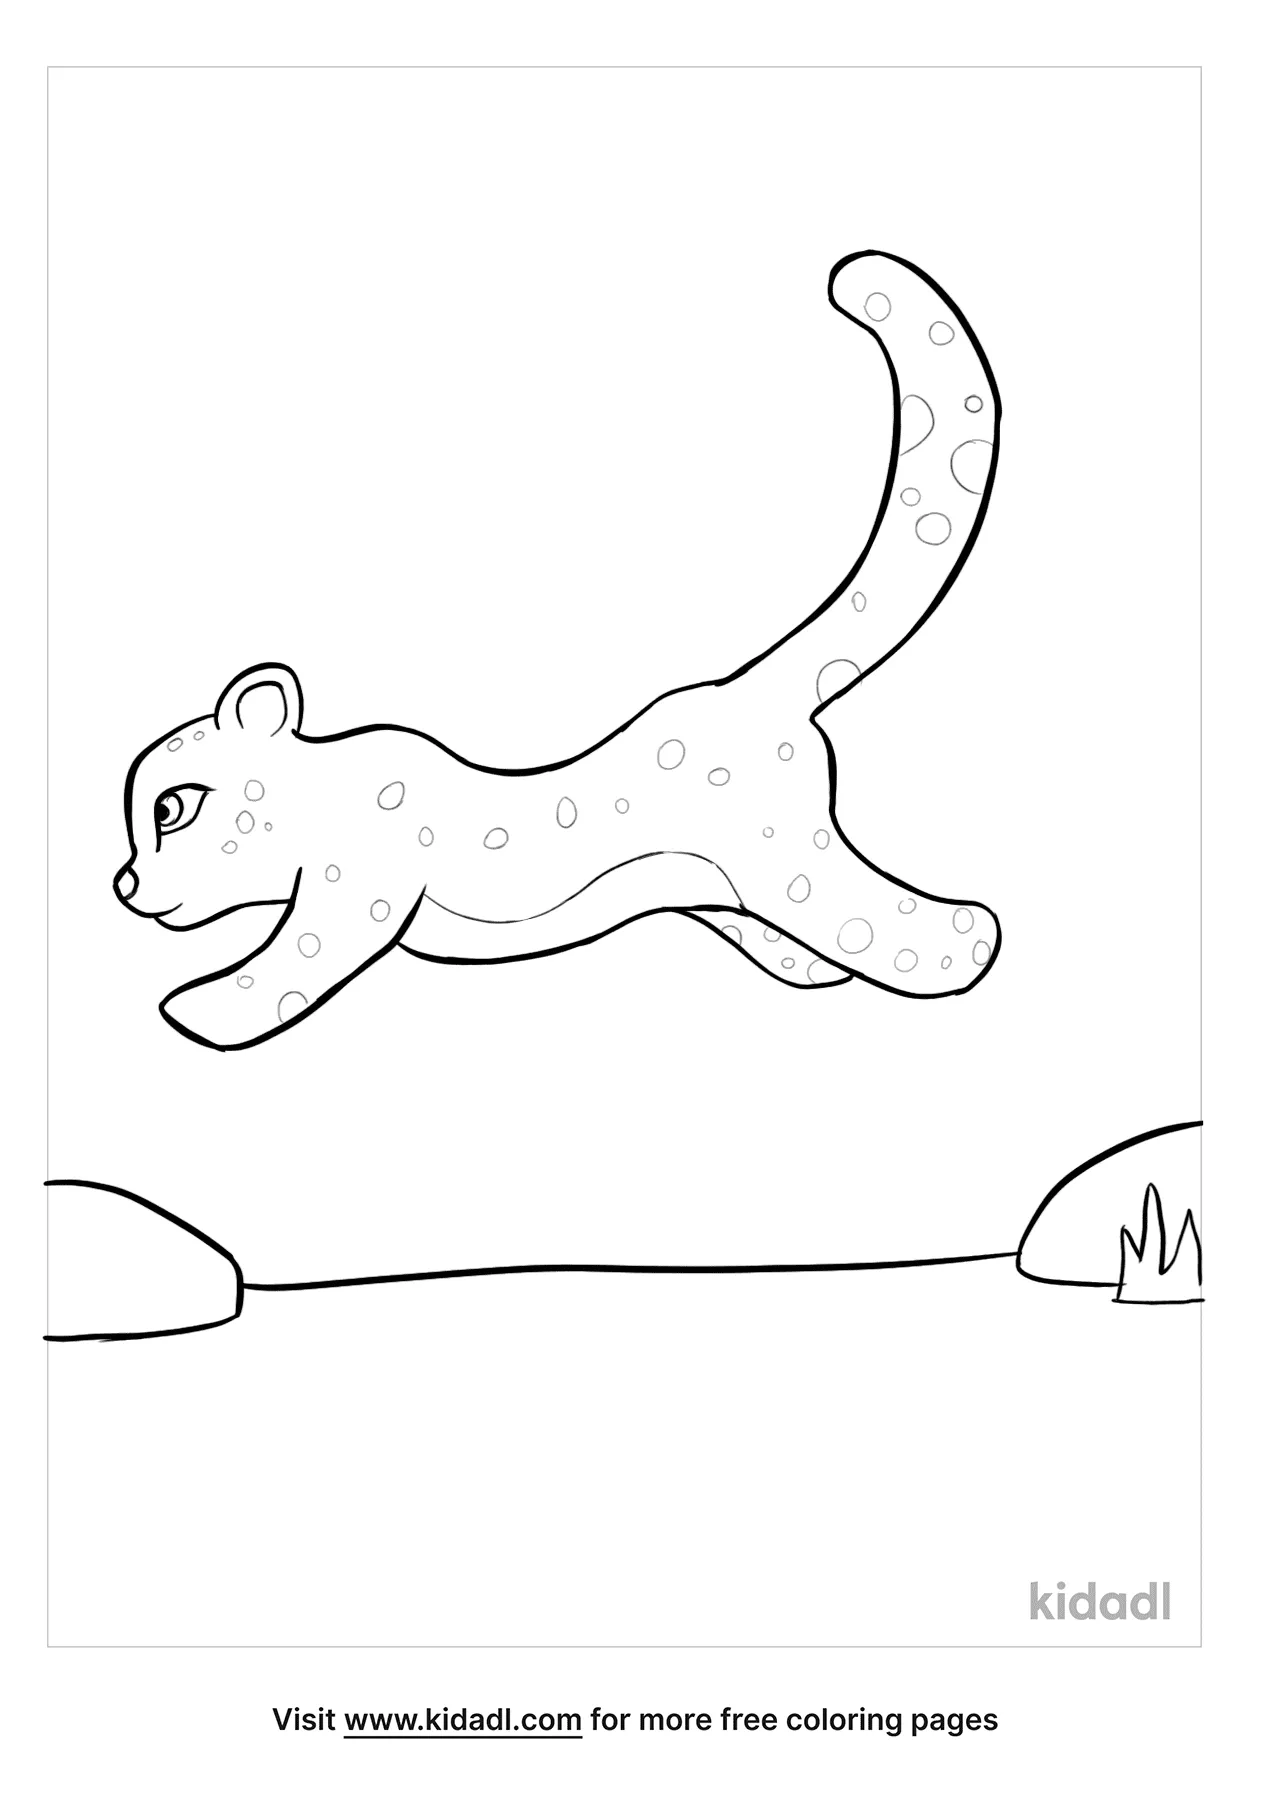 Cheetah Coloring Pages   Free Animals Coloring Pages   Kidadl